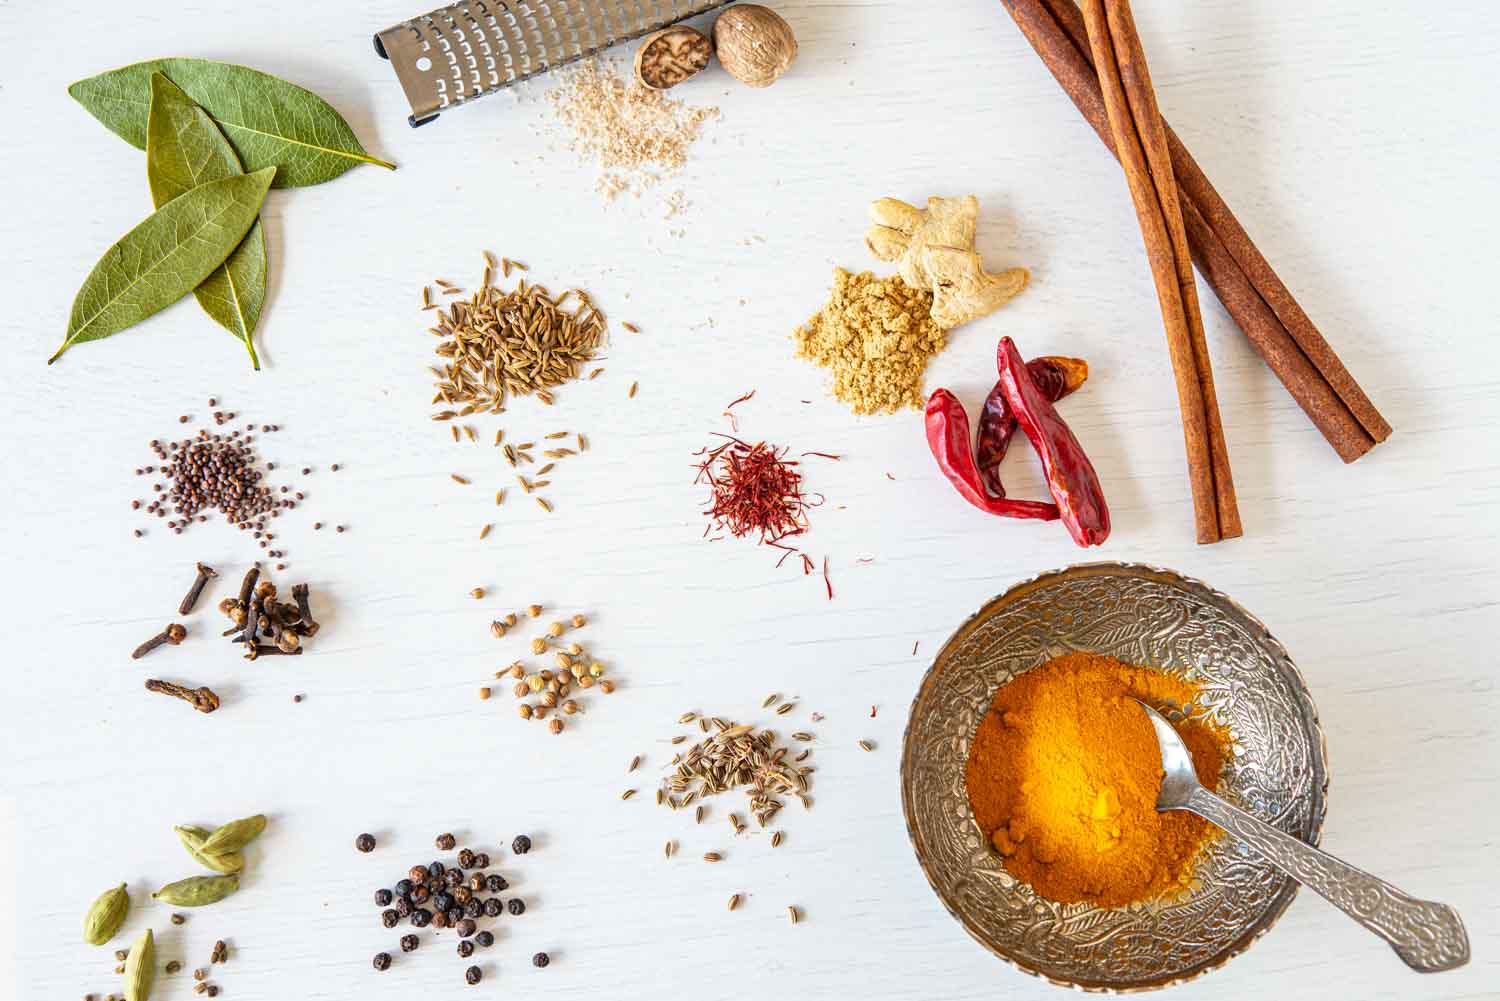 Guide to the 15 most common Indian spices